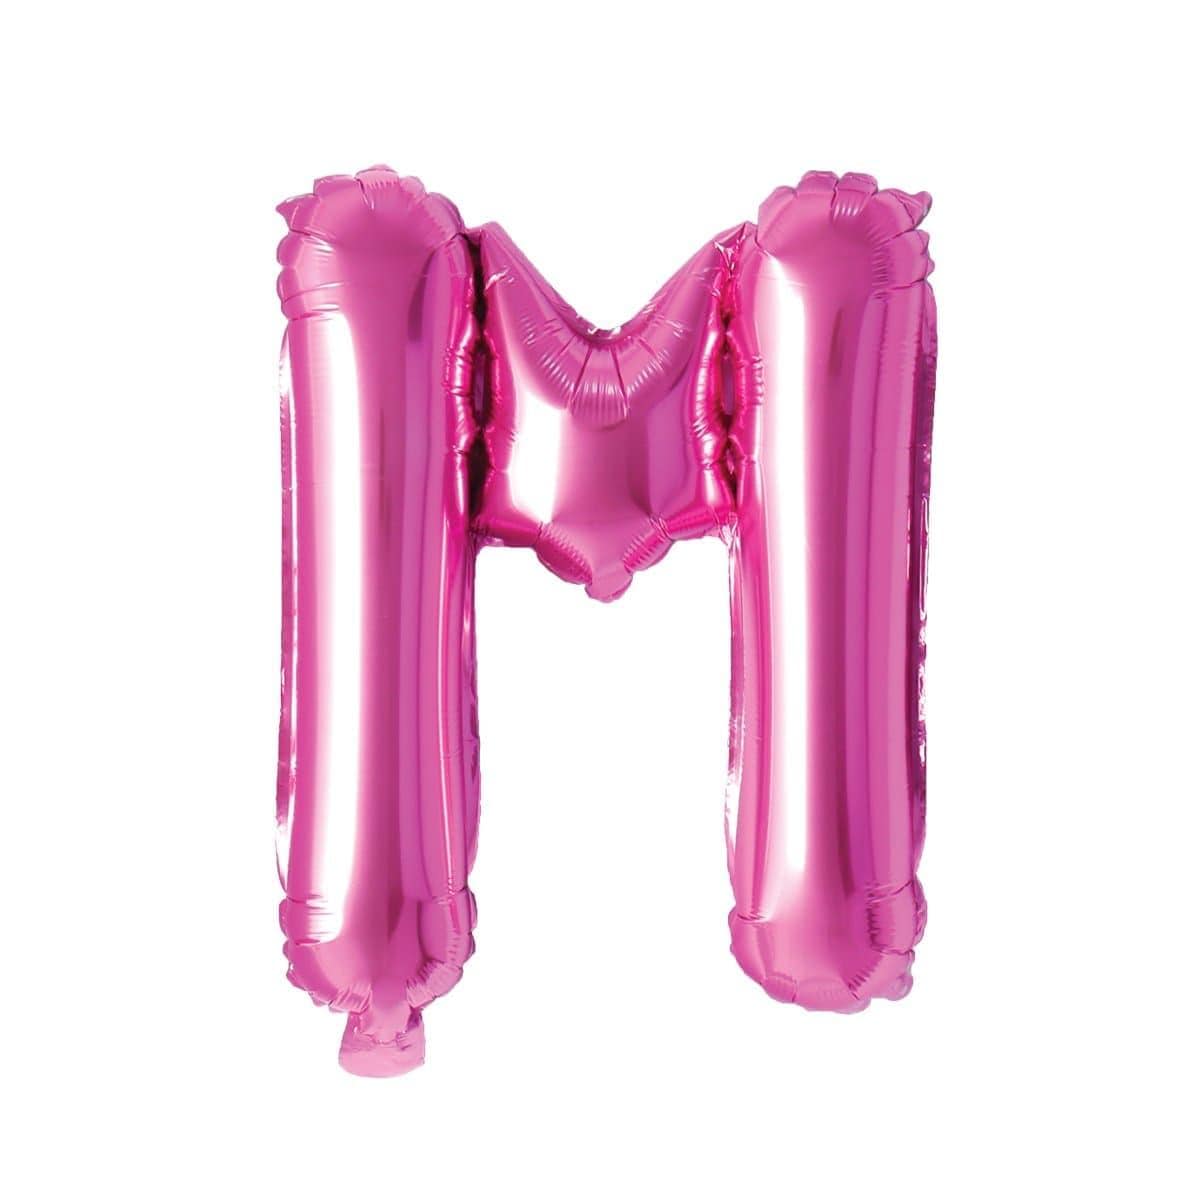 Buy Balloons Pink Letter M Foil Balloon, 16 Inches sold at Party Expert